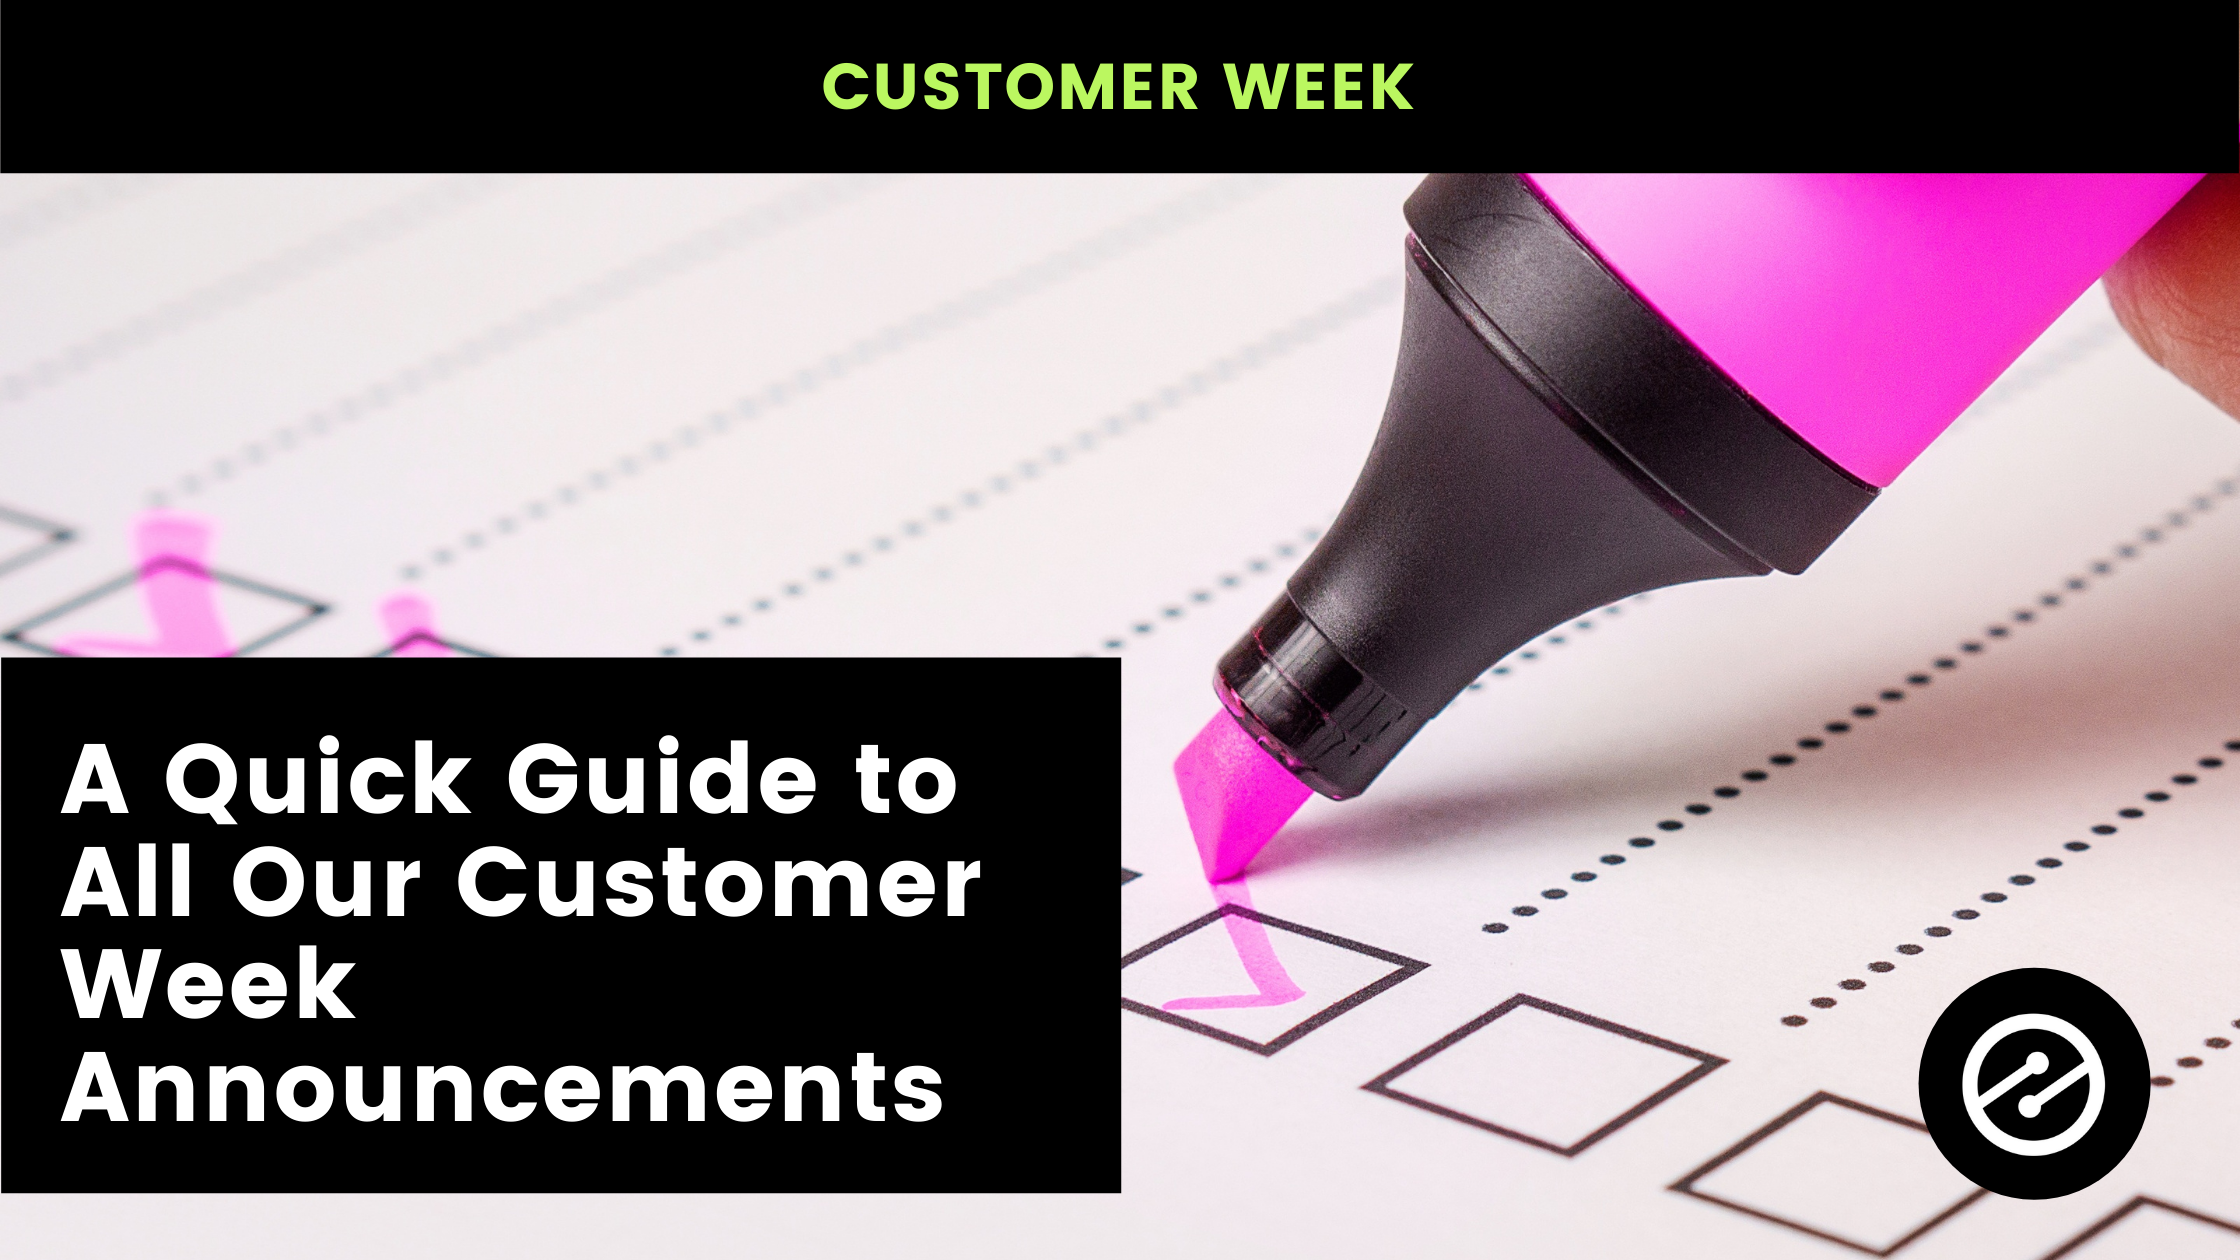 A Quick Guide to All Our Customer Week Announcements